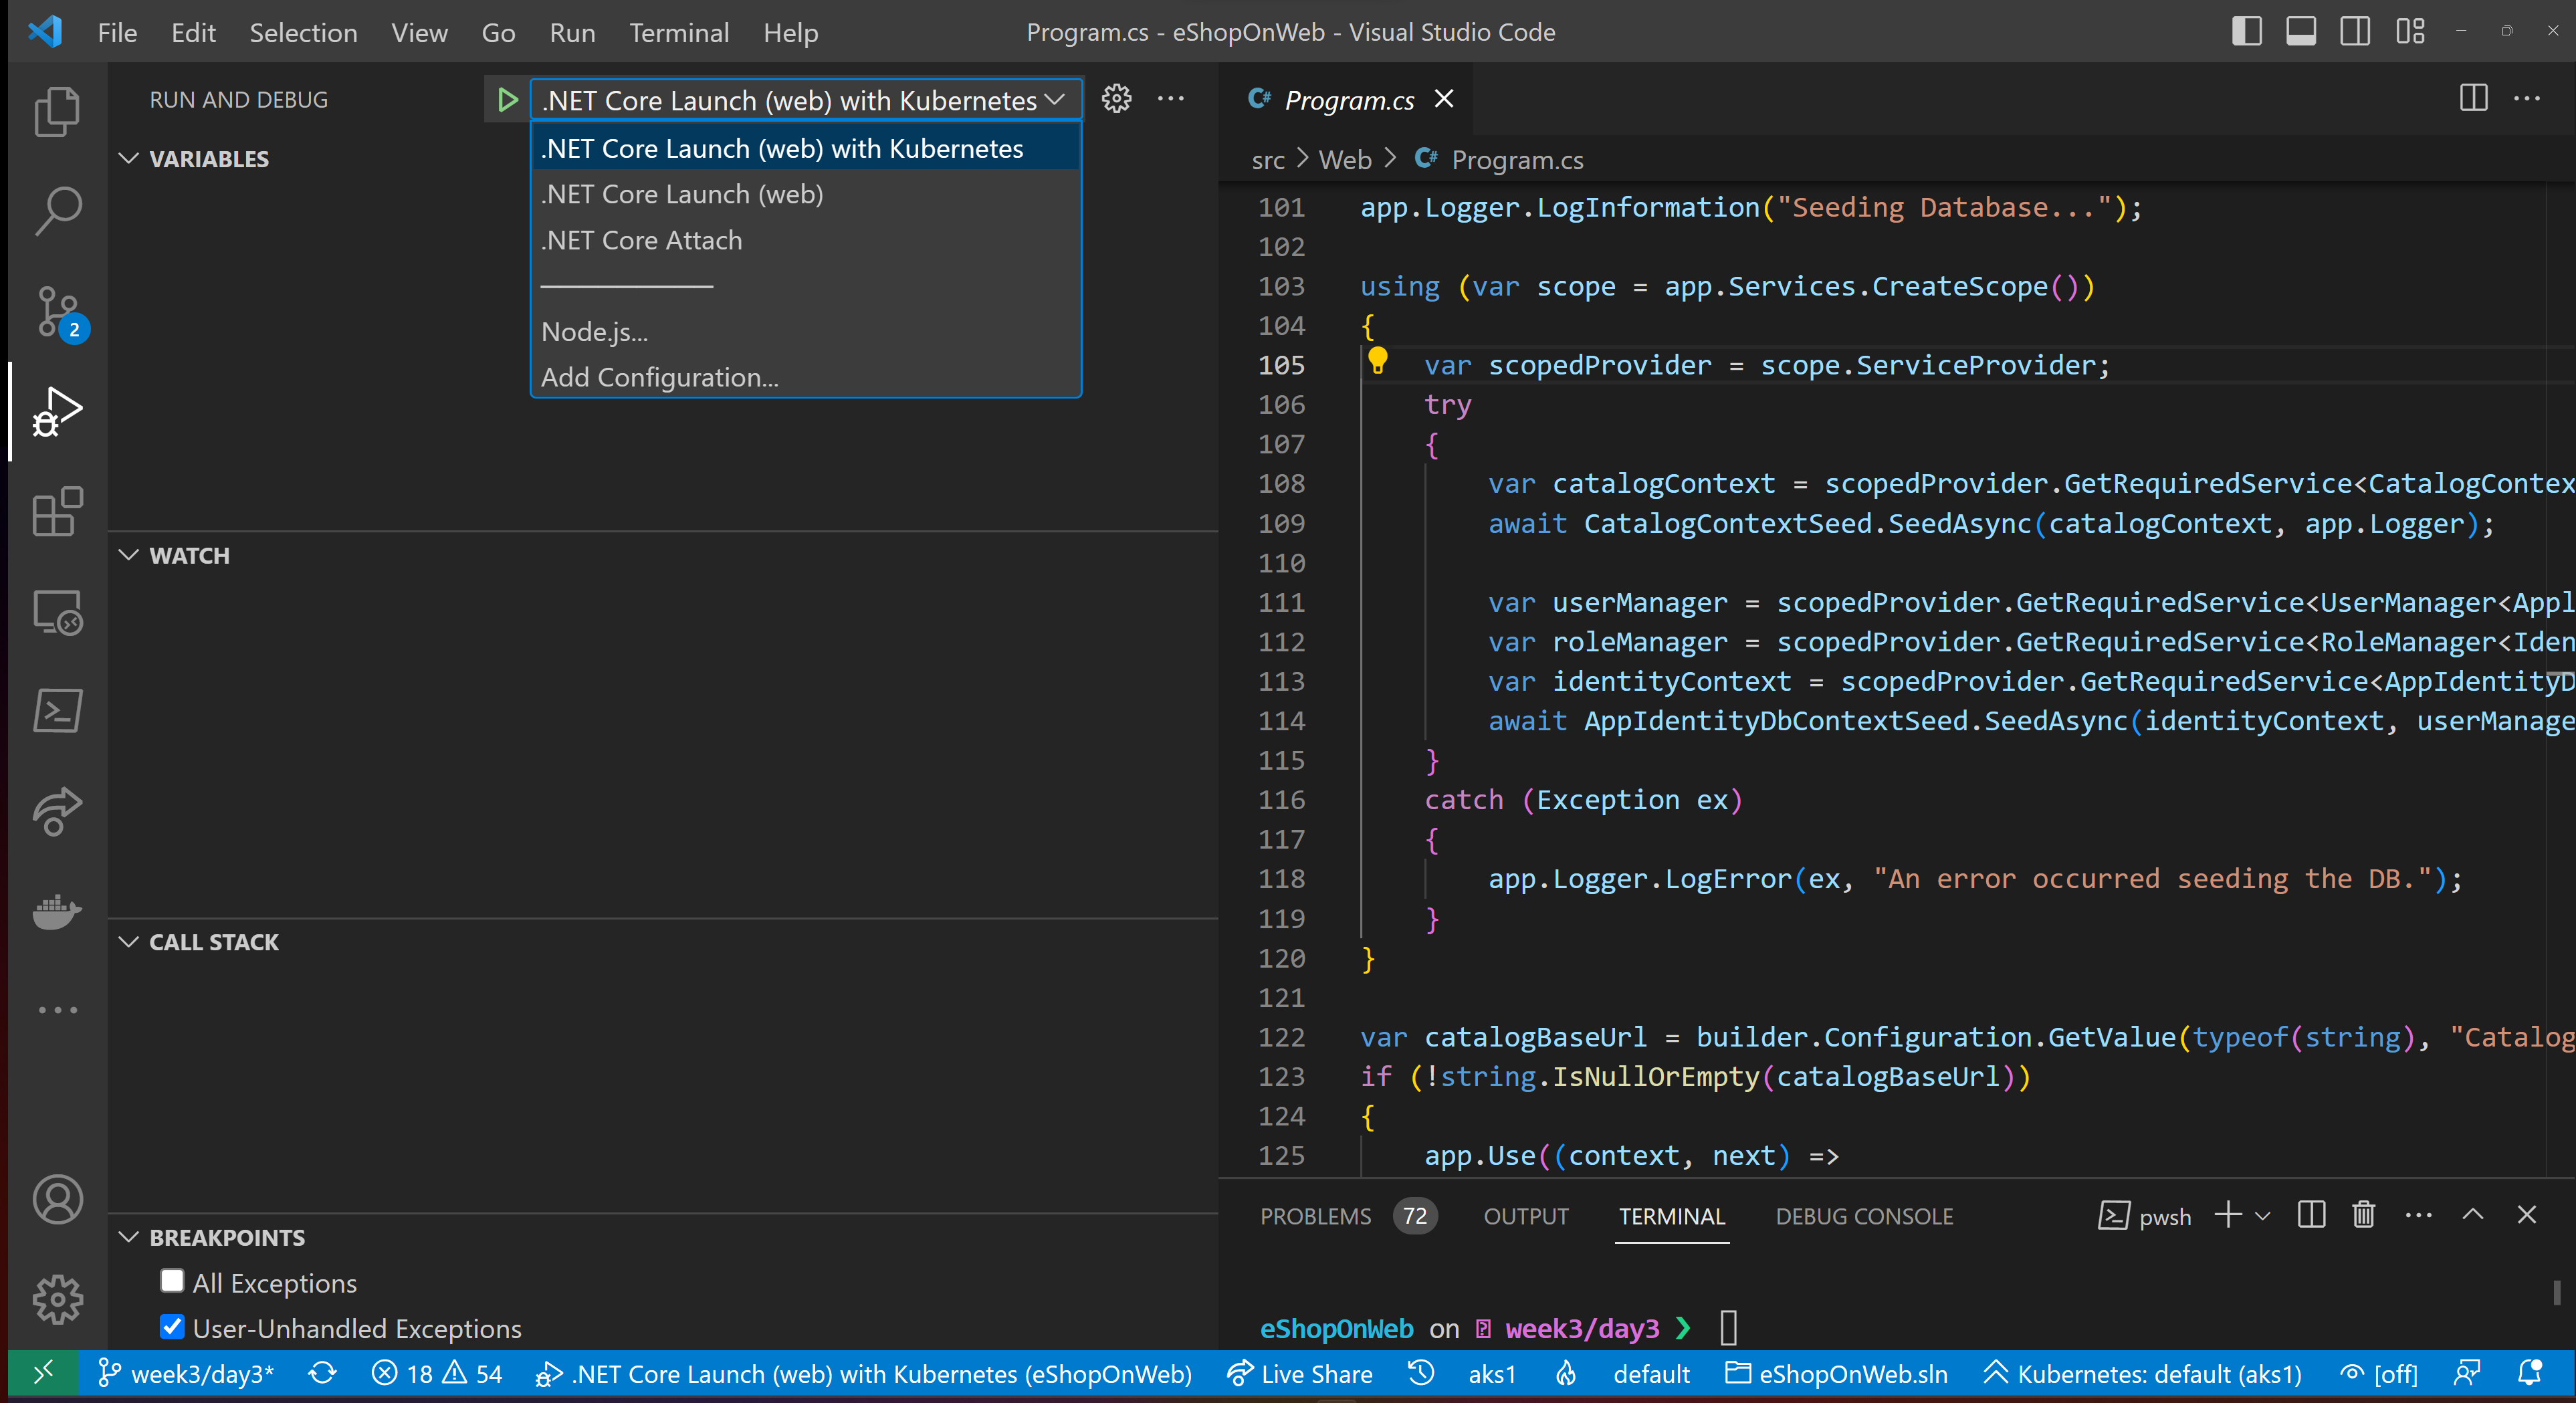 Launch the `.NET Core Launch (web) with Kubernetes` from the Debug pane in Visual Studio Code